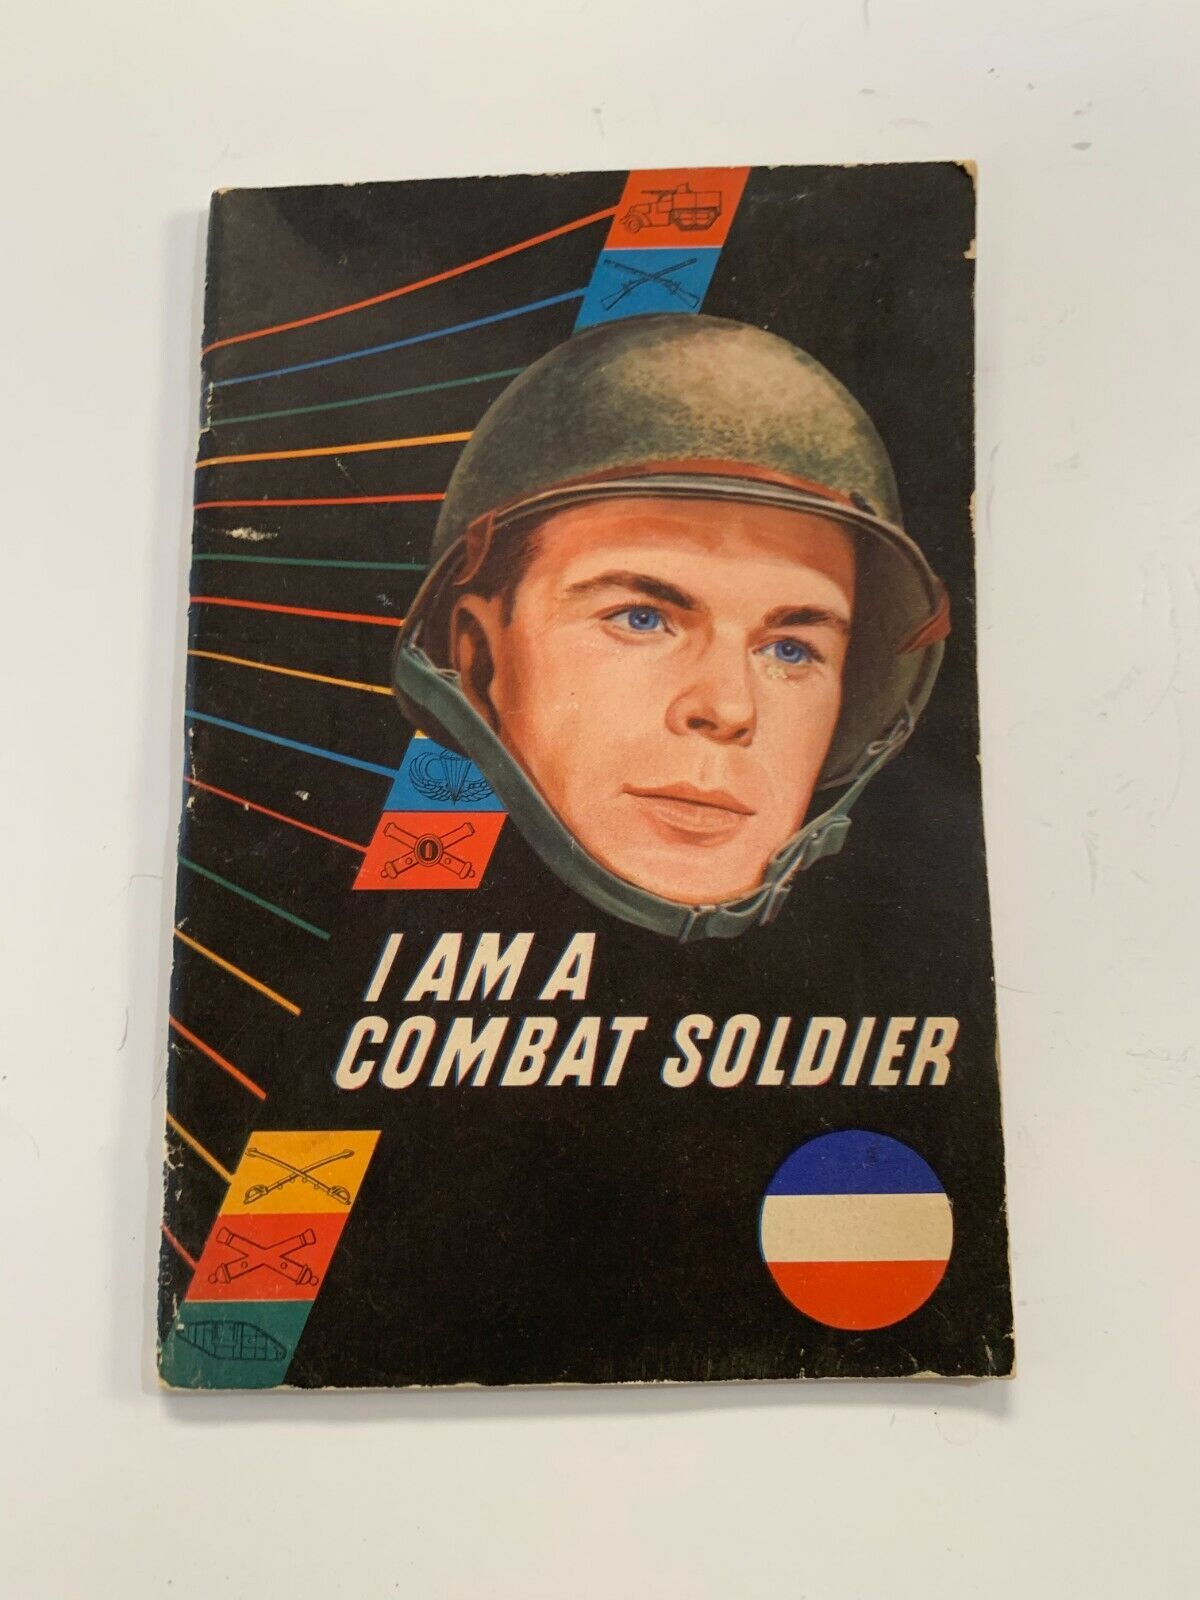 Rare “I Am a Combat Soldier” Booklet from The Army Ground Forces Schools